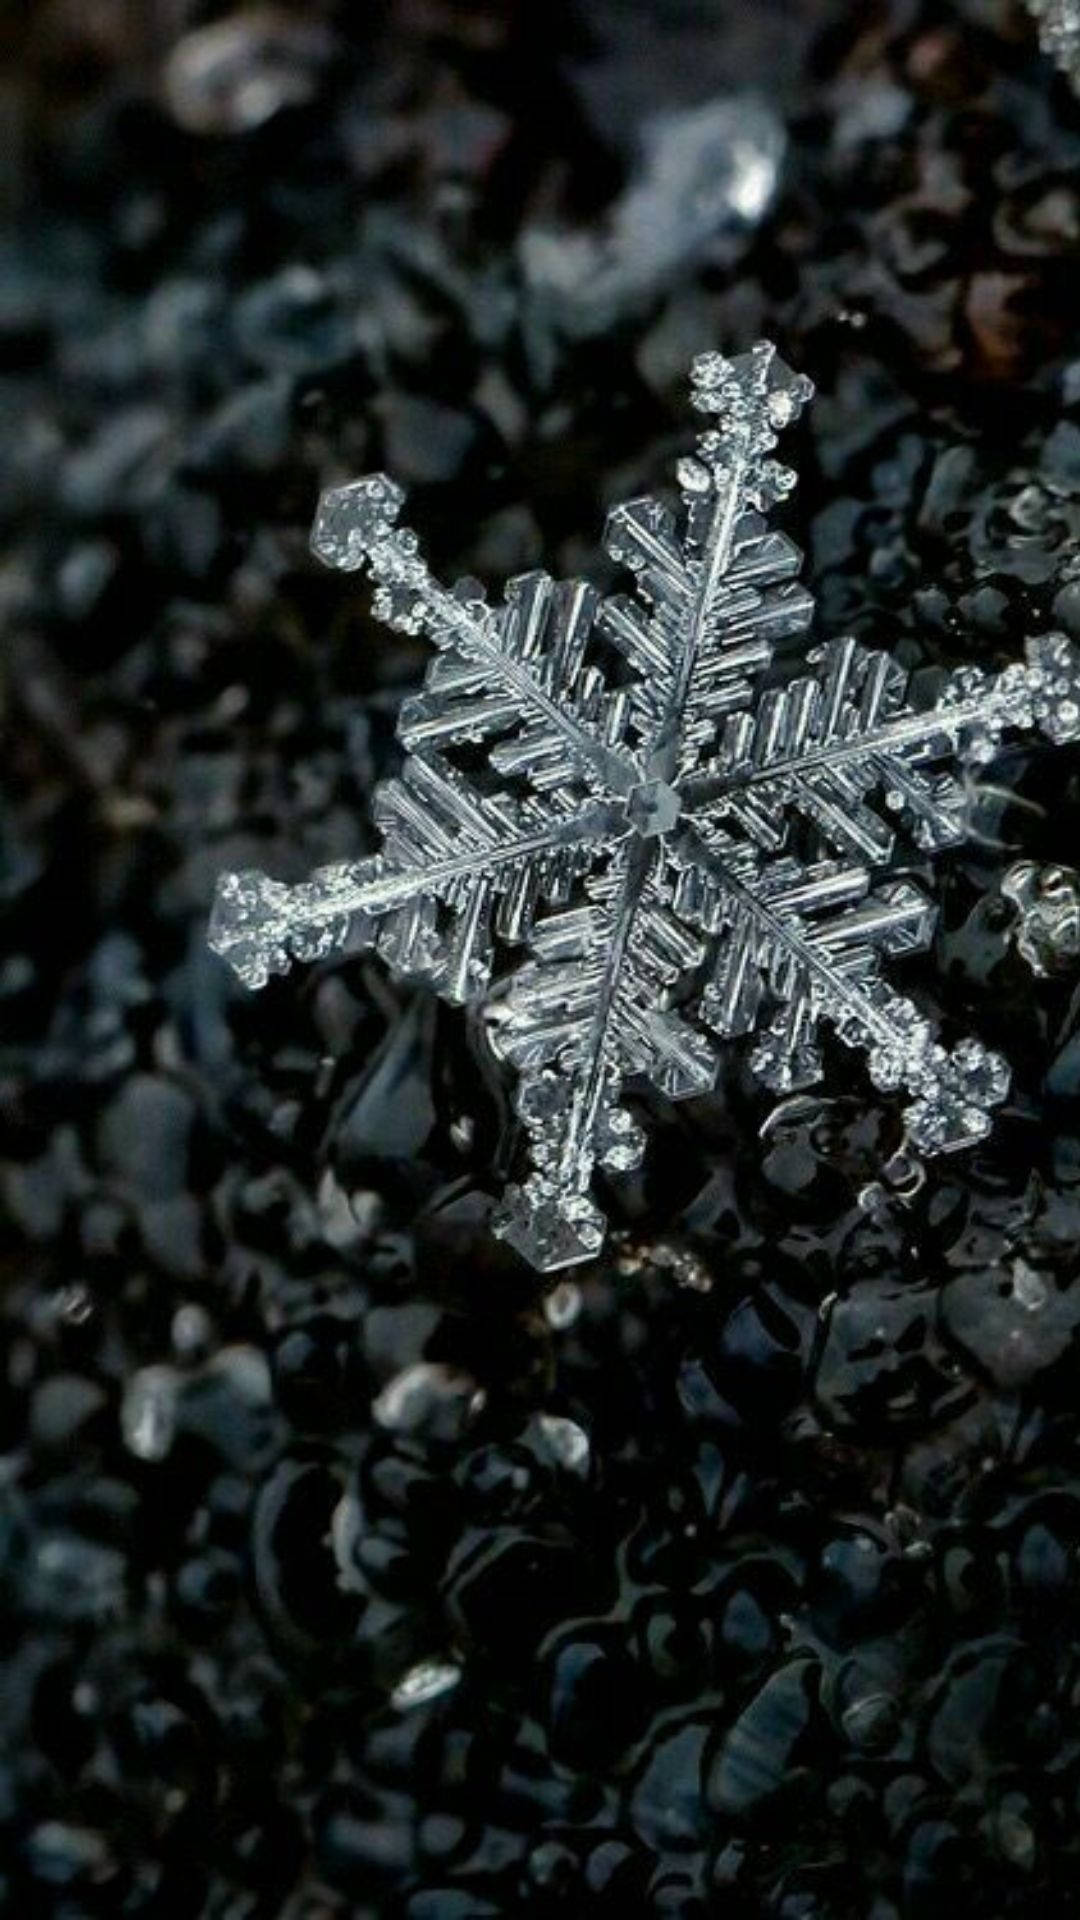 Brighten up your winter with the snowflake-themed Snowflake Iphone Wallpaper